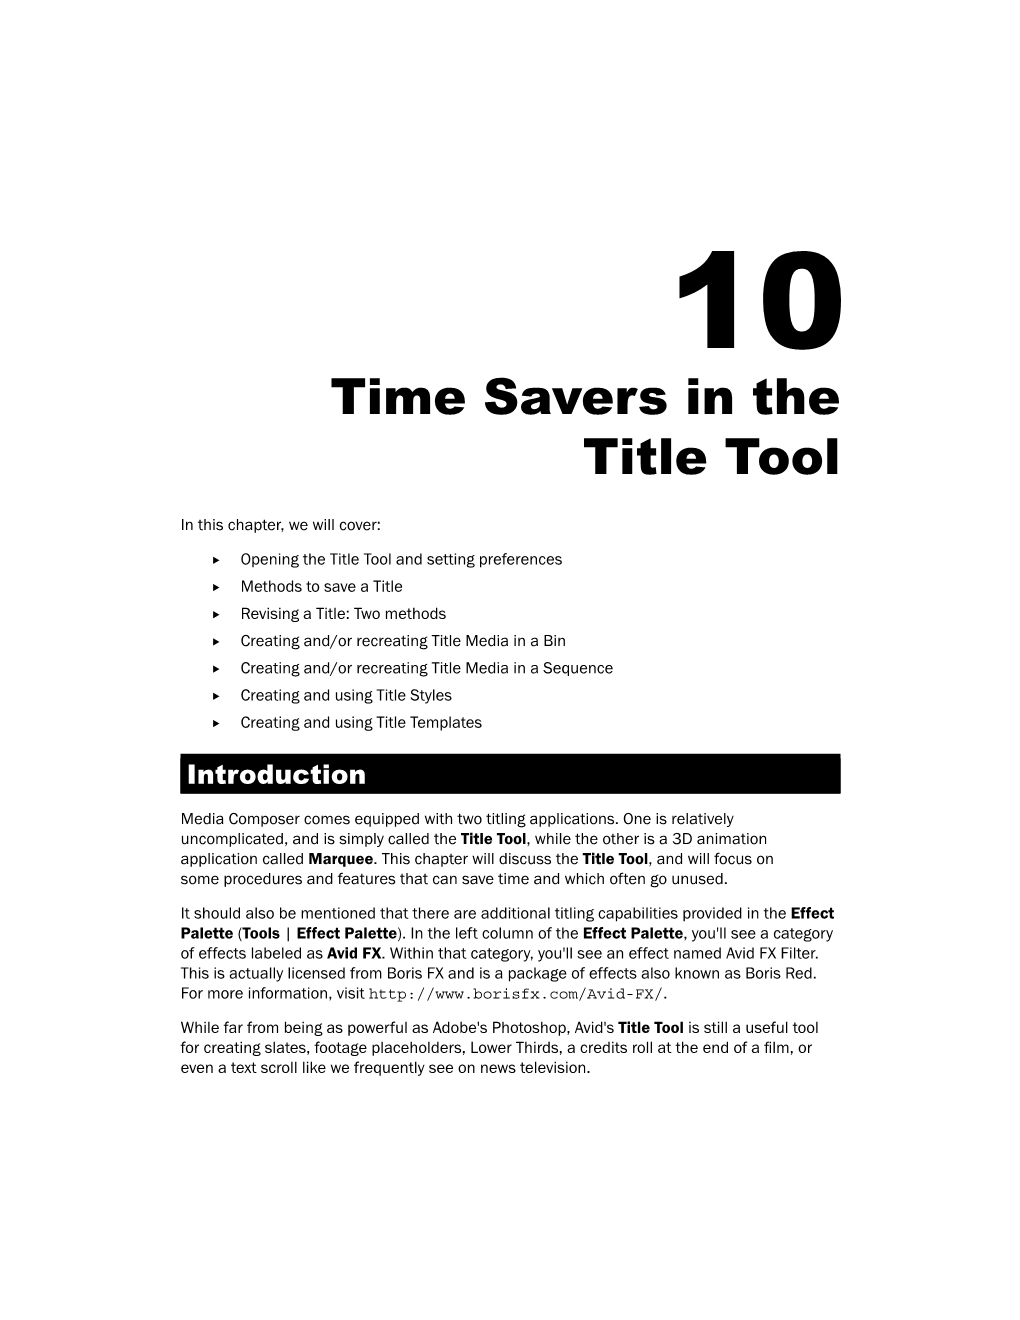 Time Savers in the Title Tool